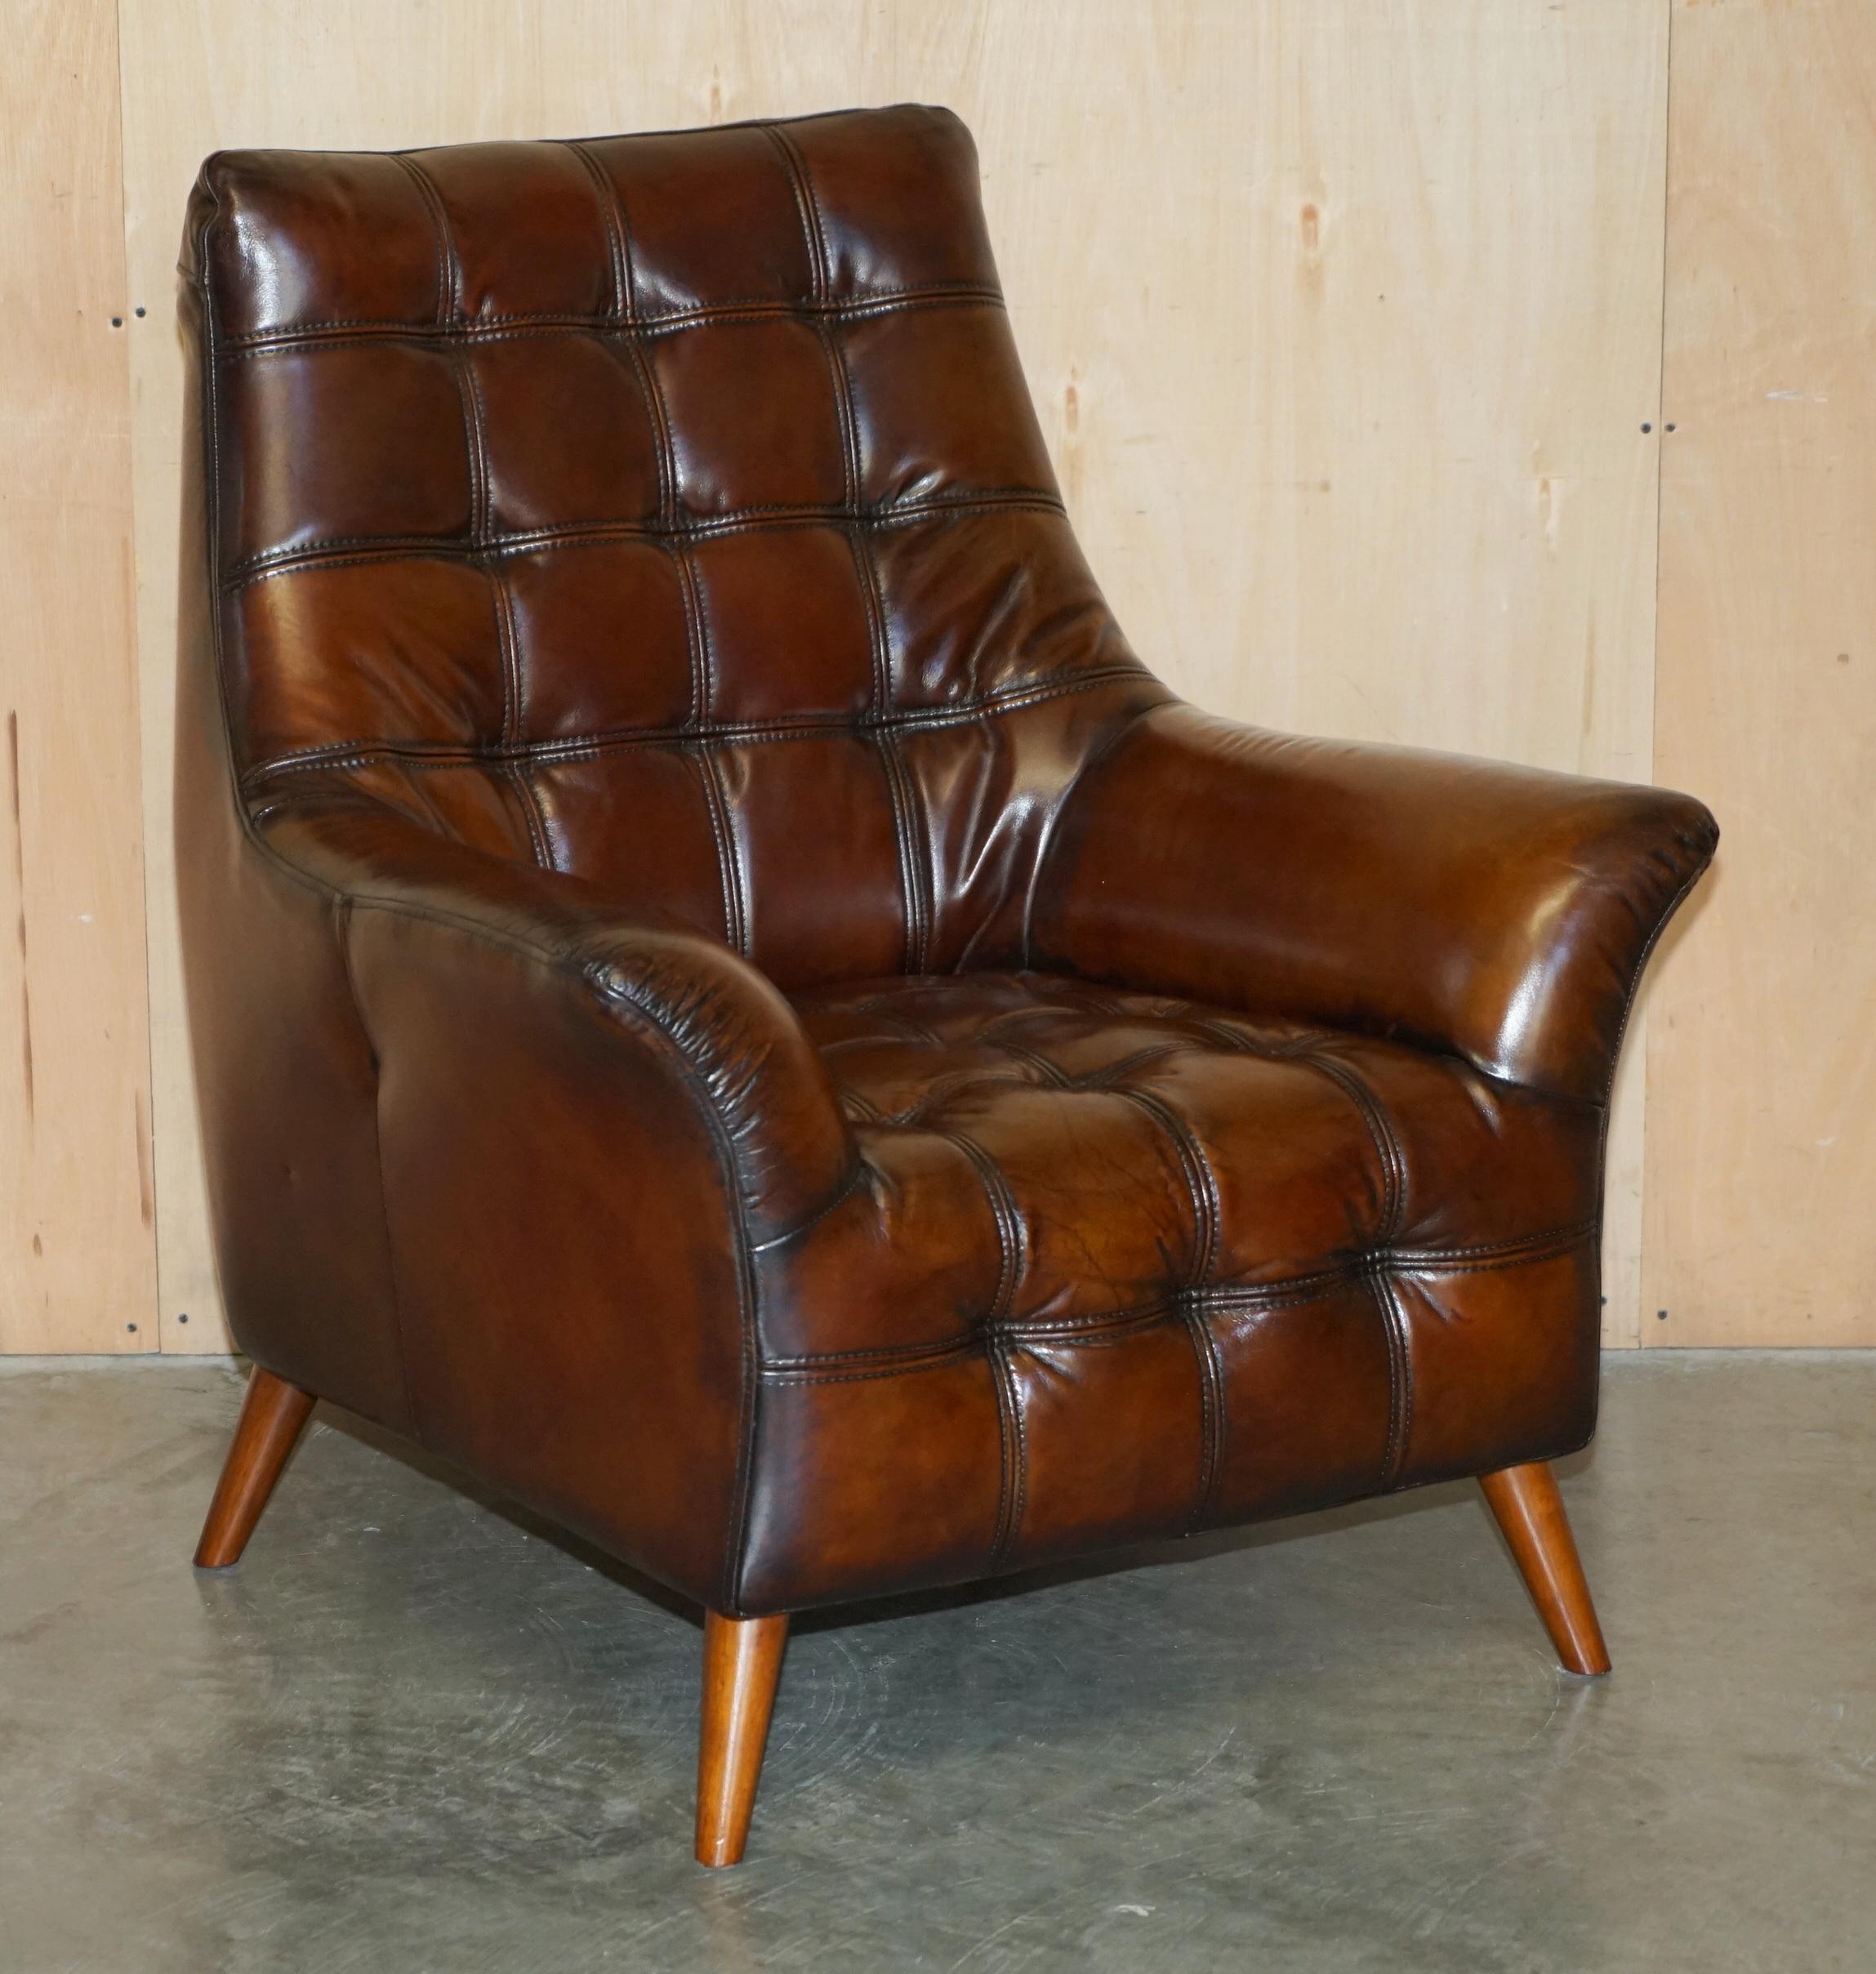 PAIR OF FULLY RESTORED HAND DYED CHESTERFiELD WHISKY BROWN LEATHER ARMCHAIRS For Sale 7